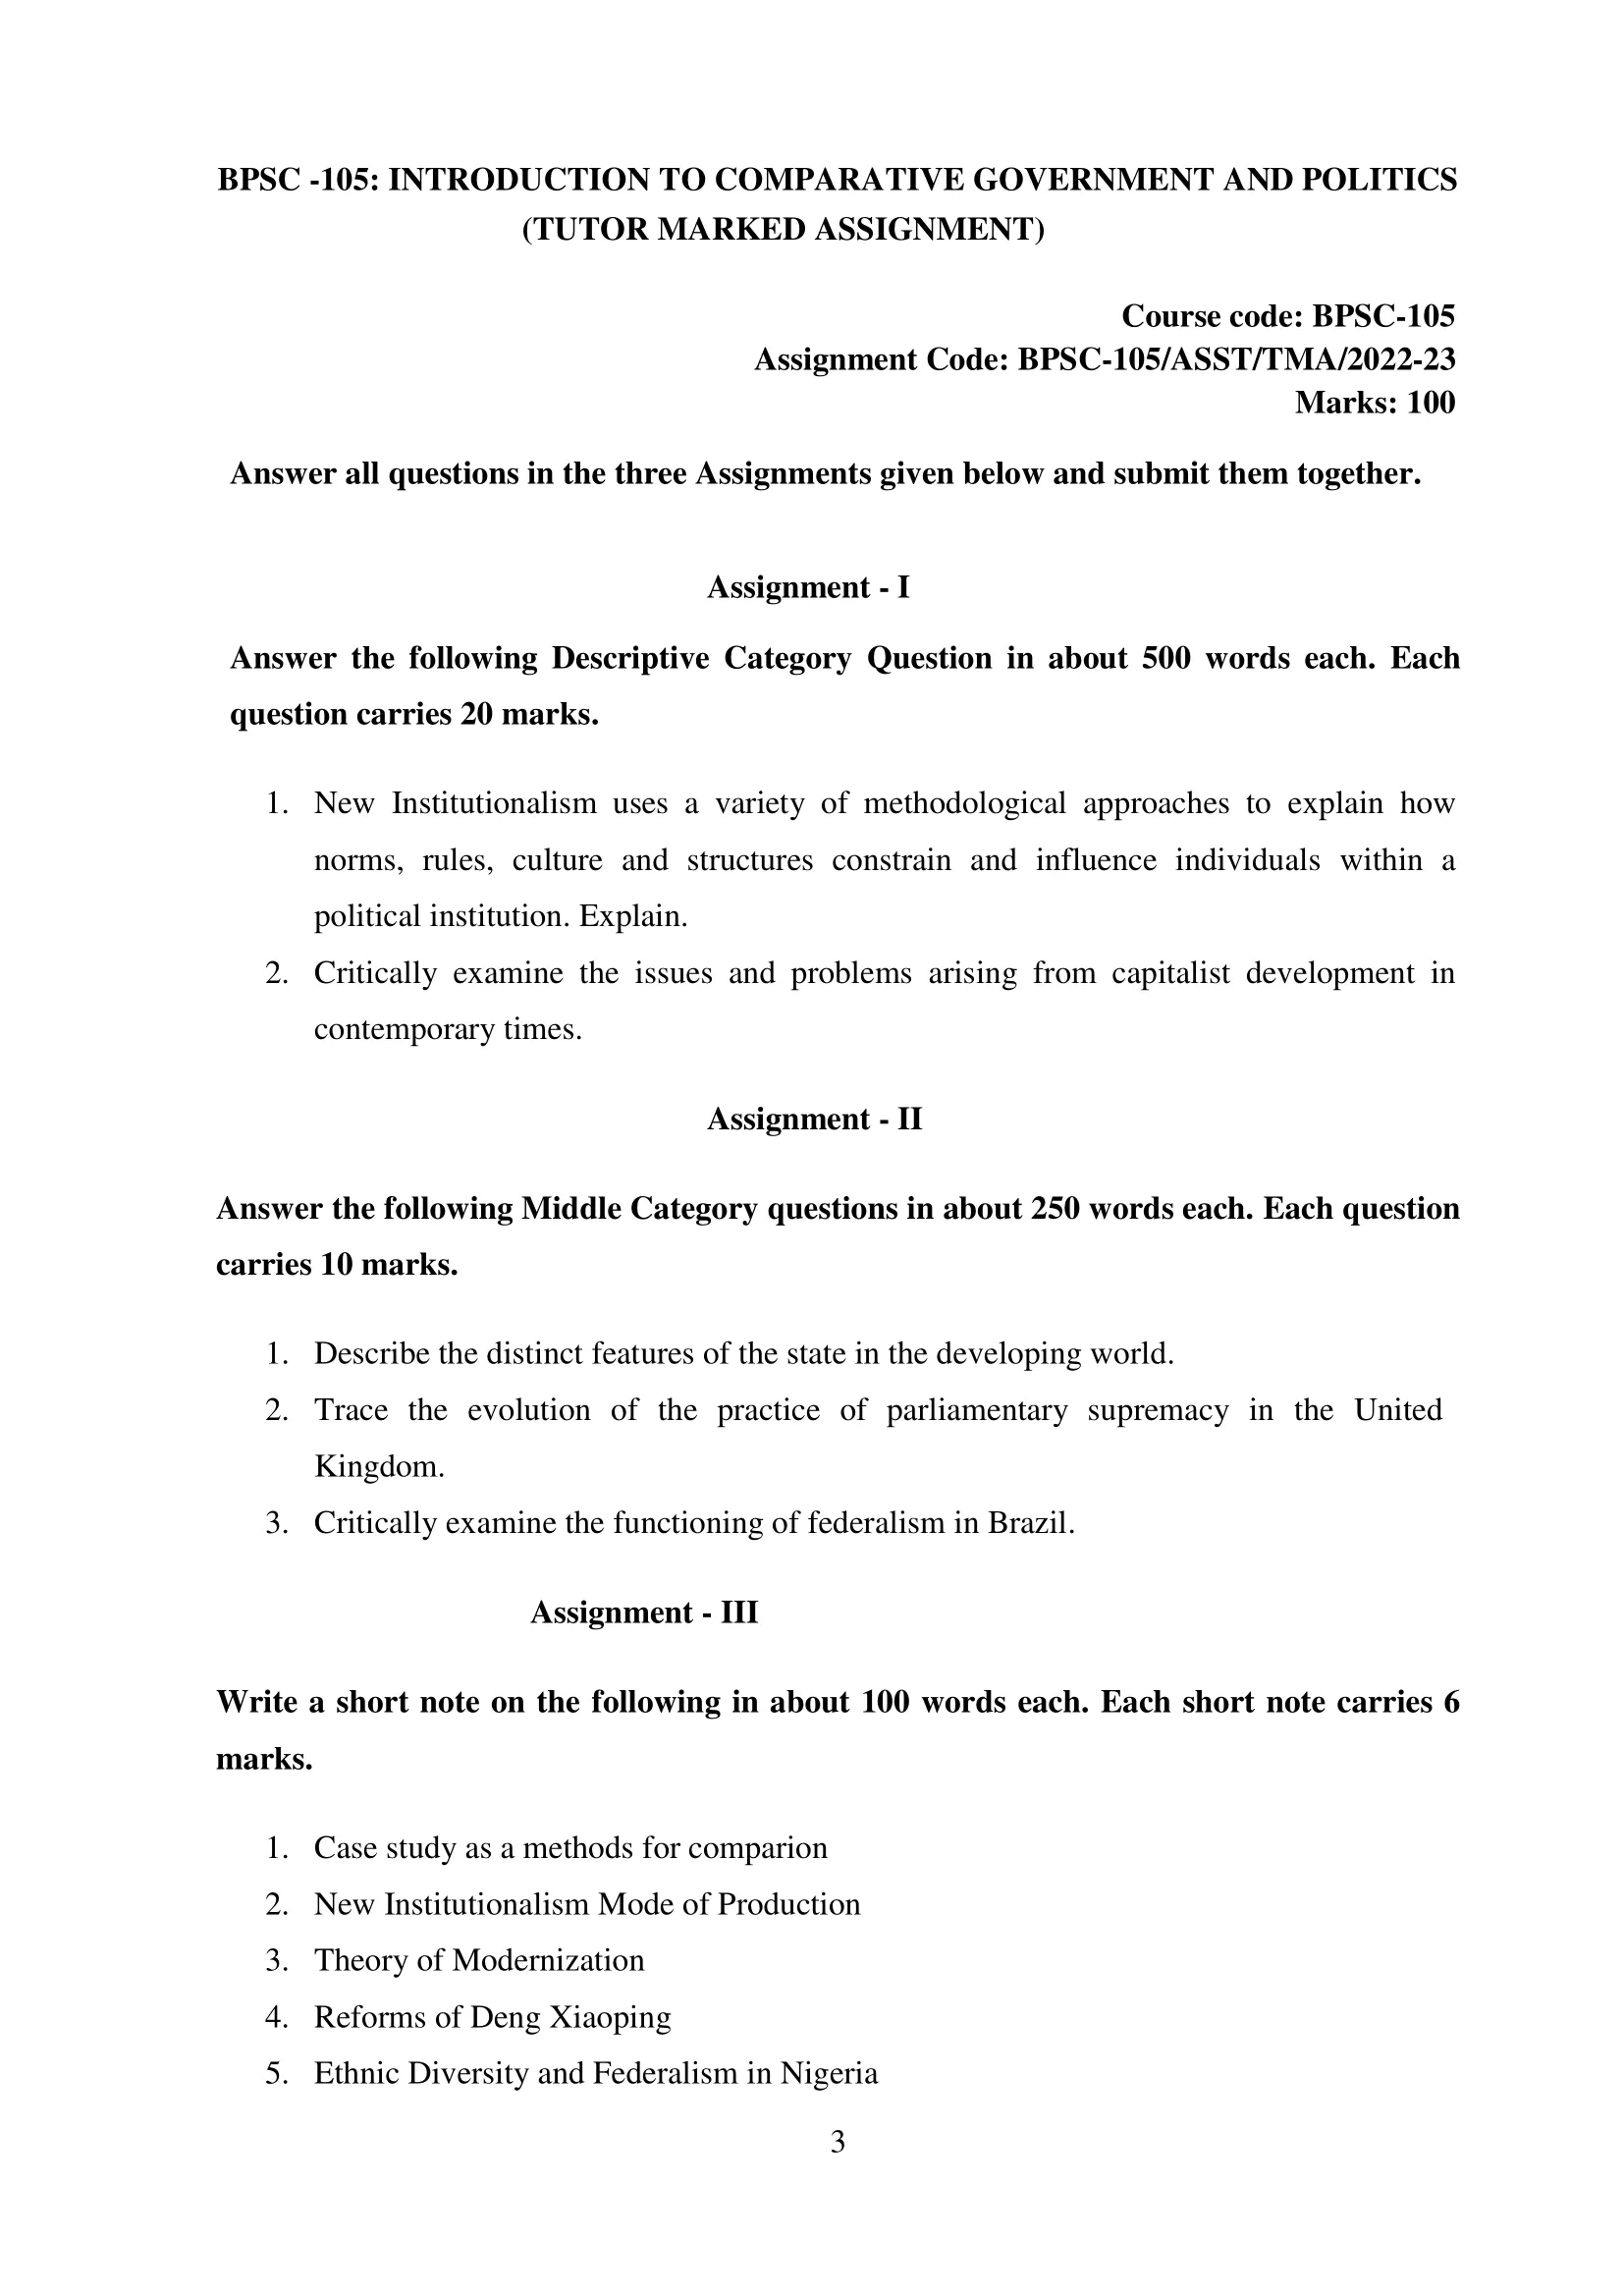 BPSC-105 IGNOU BAG Solved Assignment- INTRODUCTION TO COMPARATIVE GOVERNMENT AND POLITICS